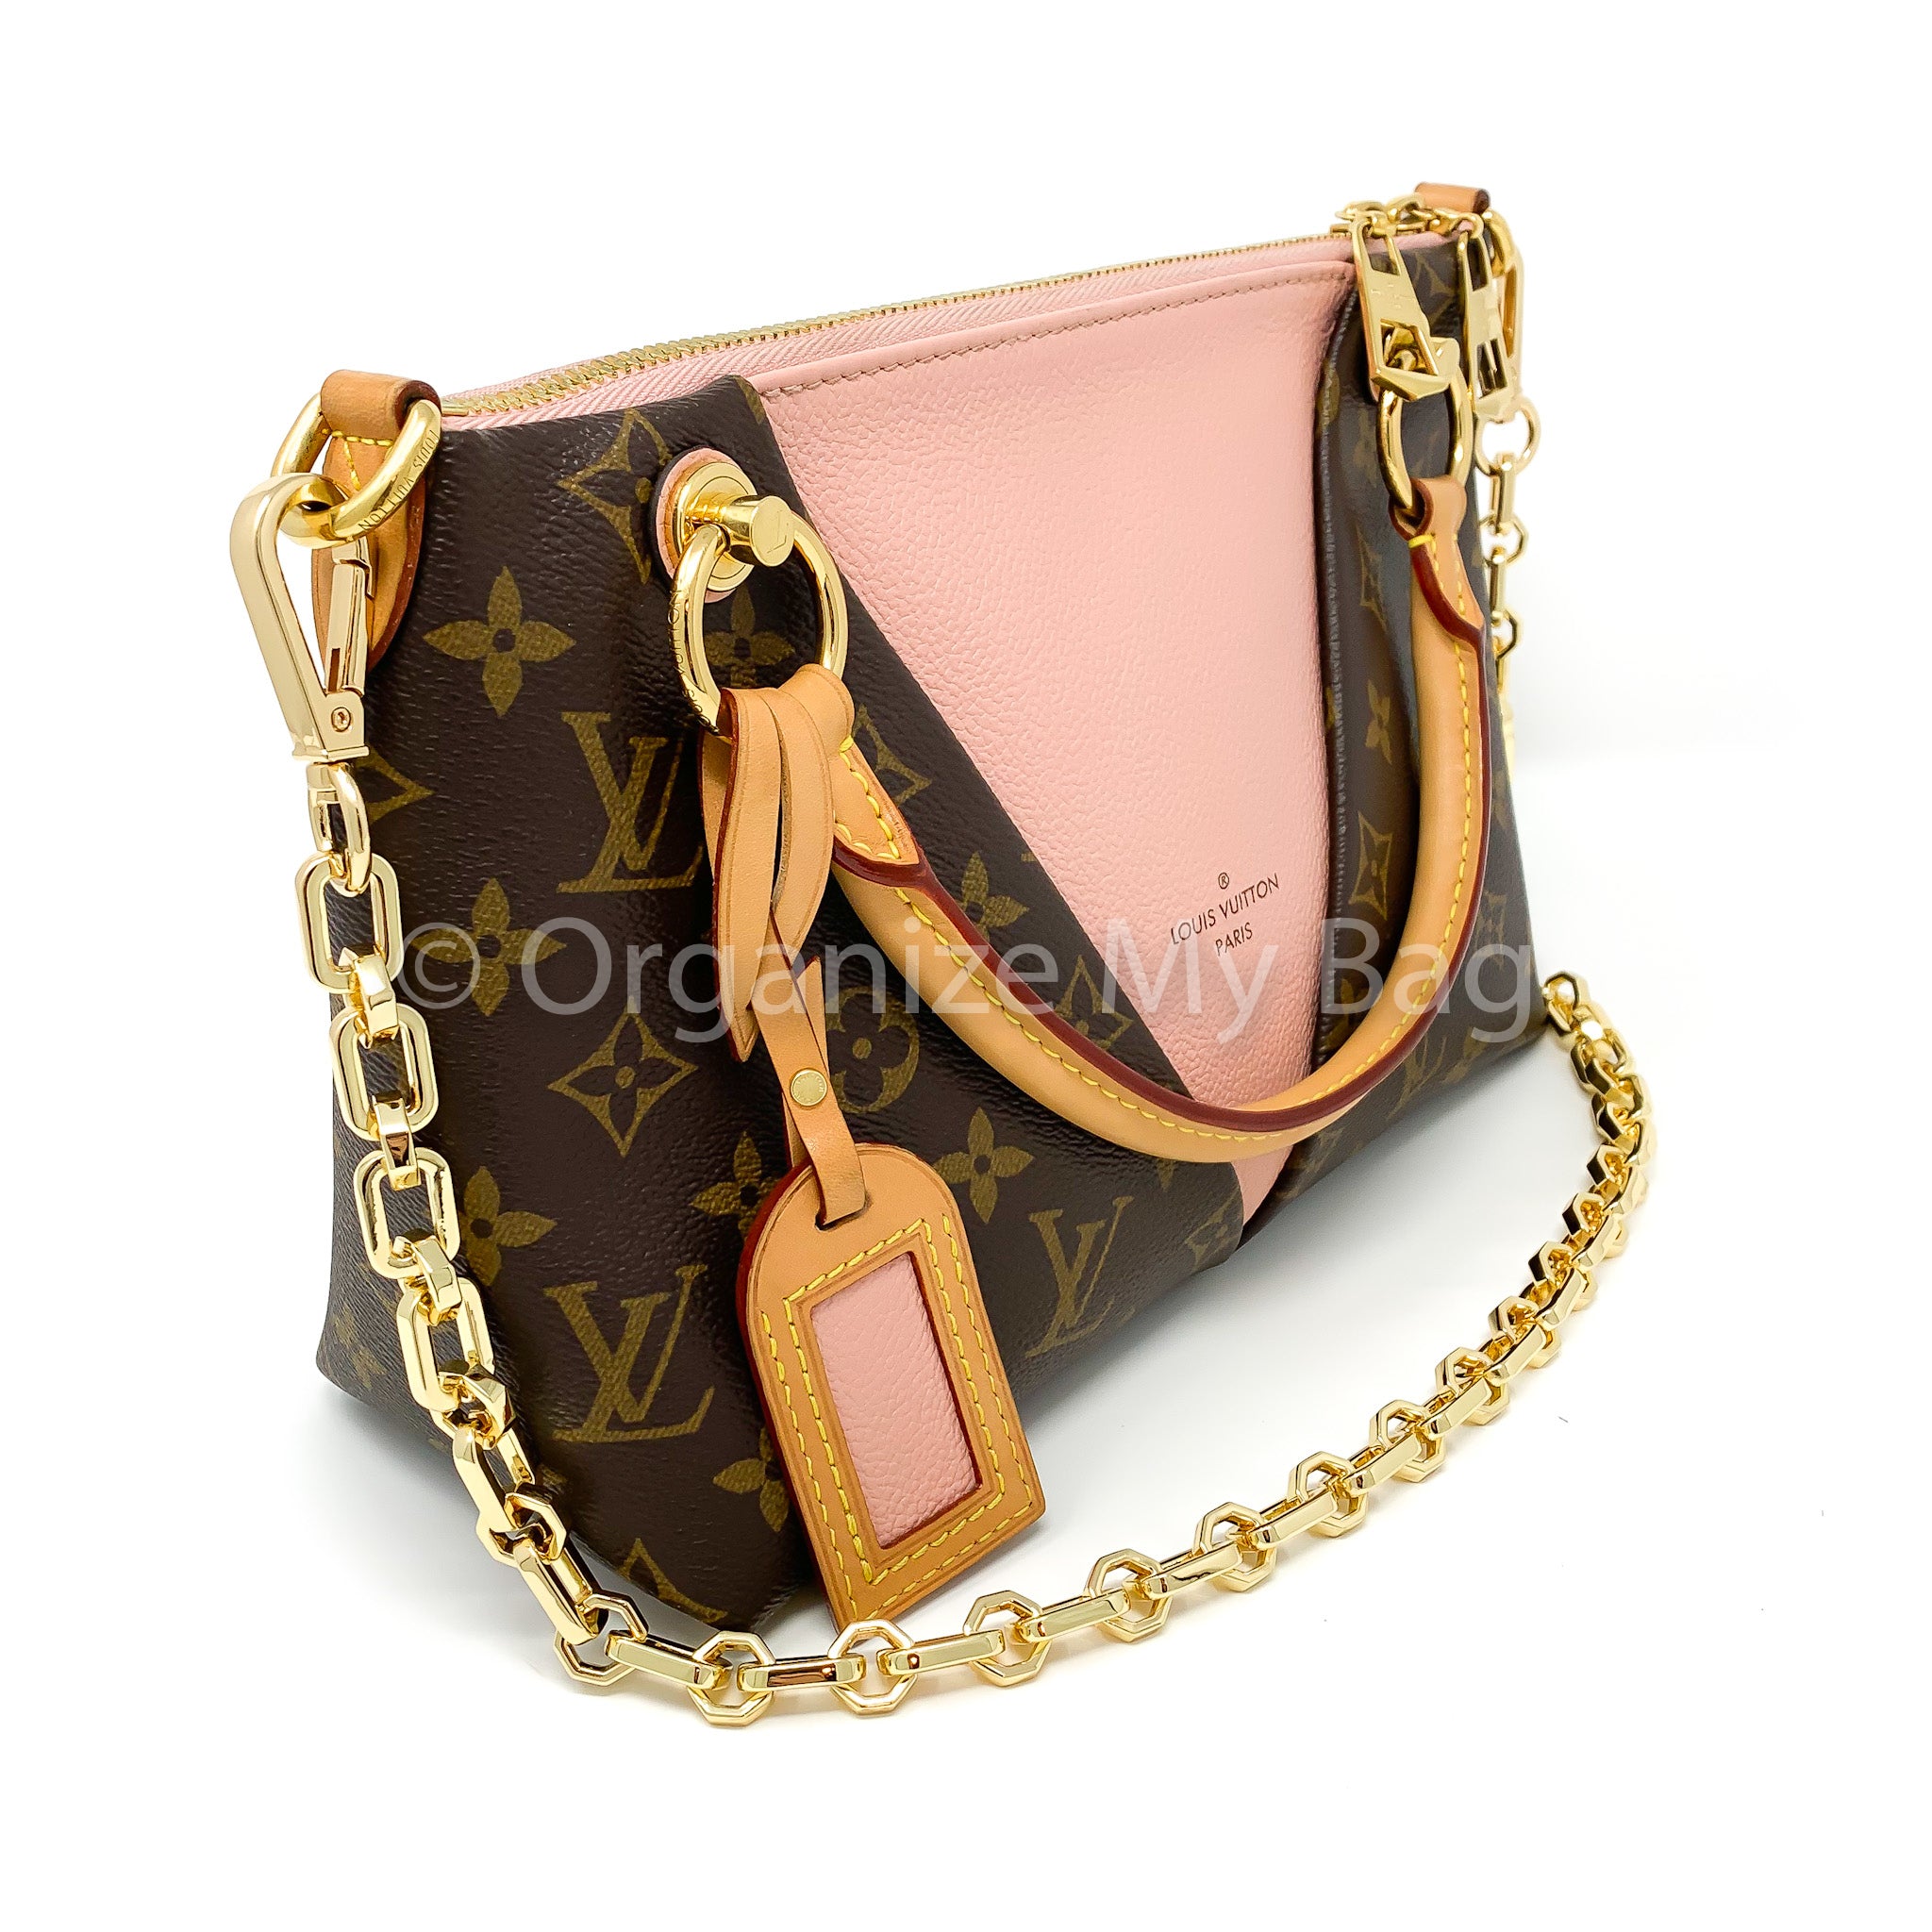 What's In My Bag!?, Louis Vuitton Speedy B 20 Rose Poudre